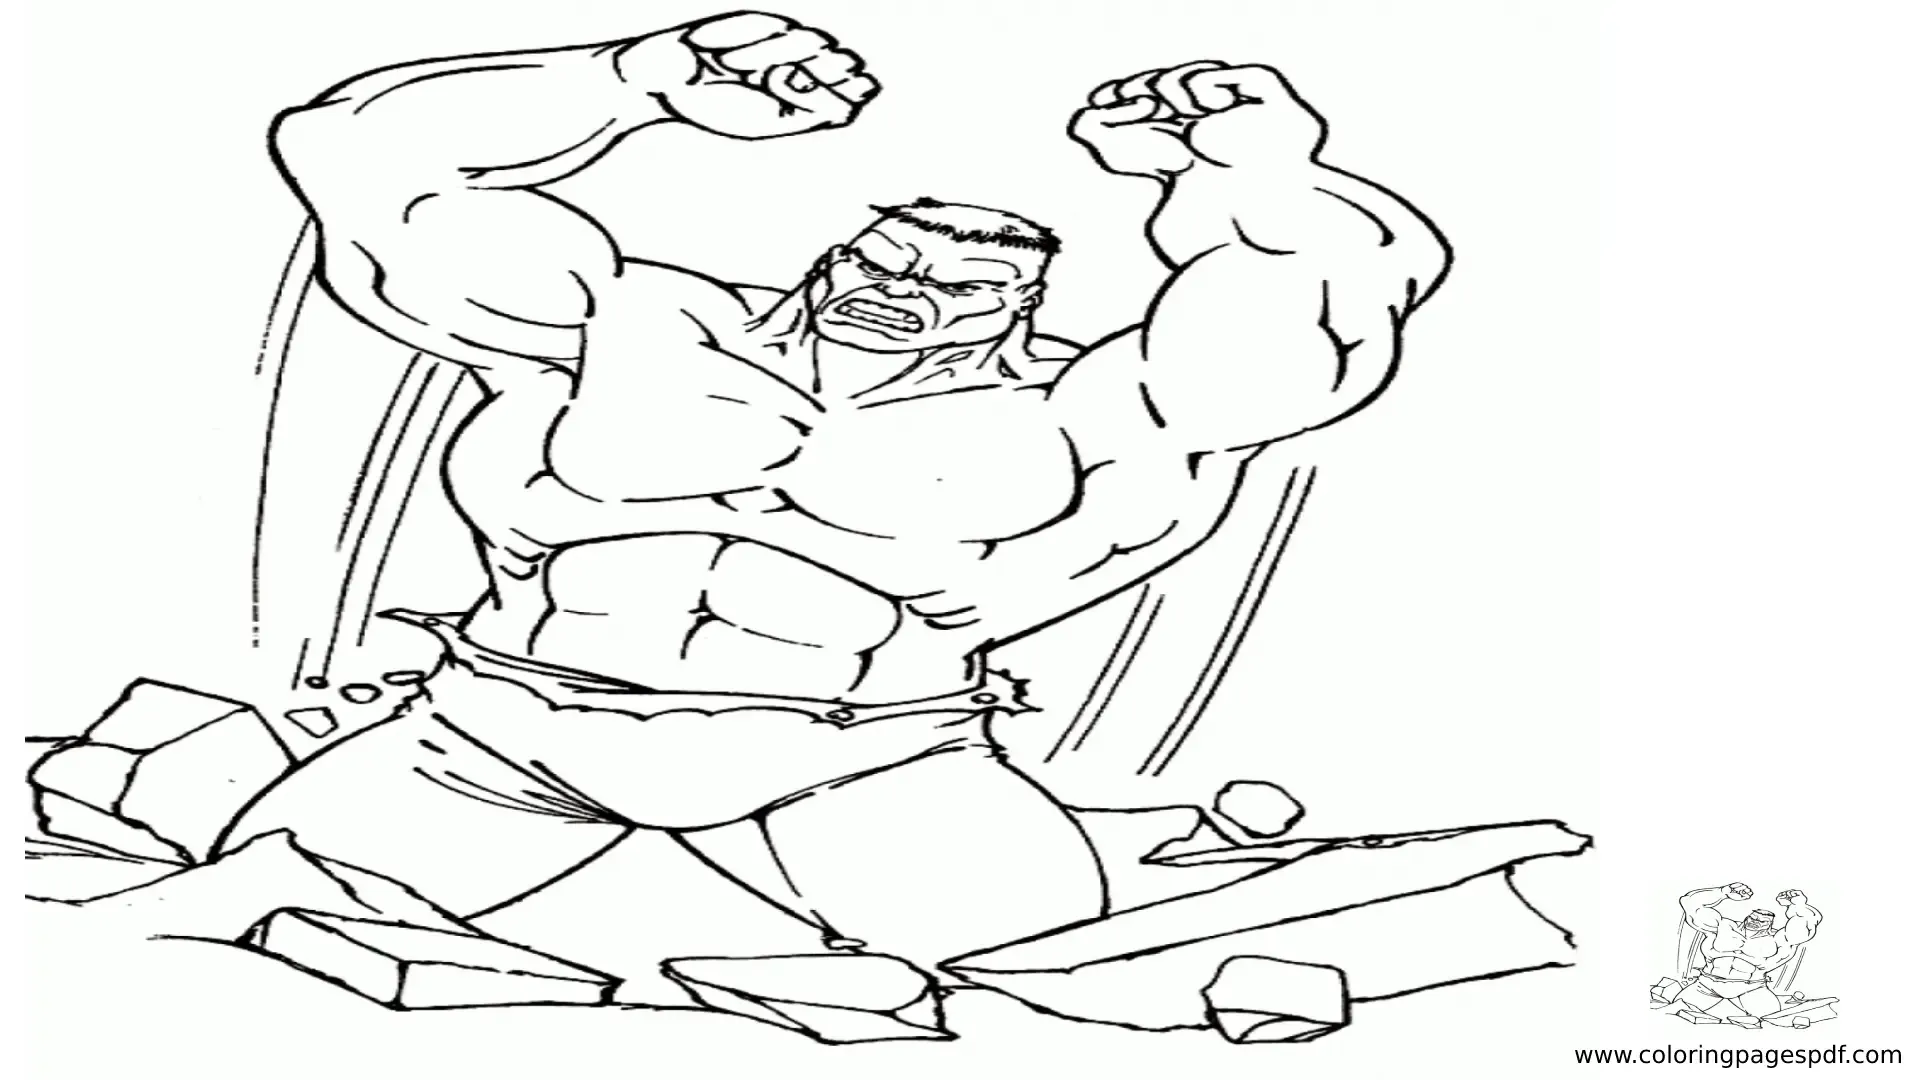 Coloring Pages Of Hulk Smashing The Ground